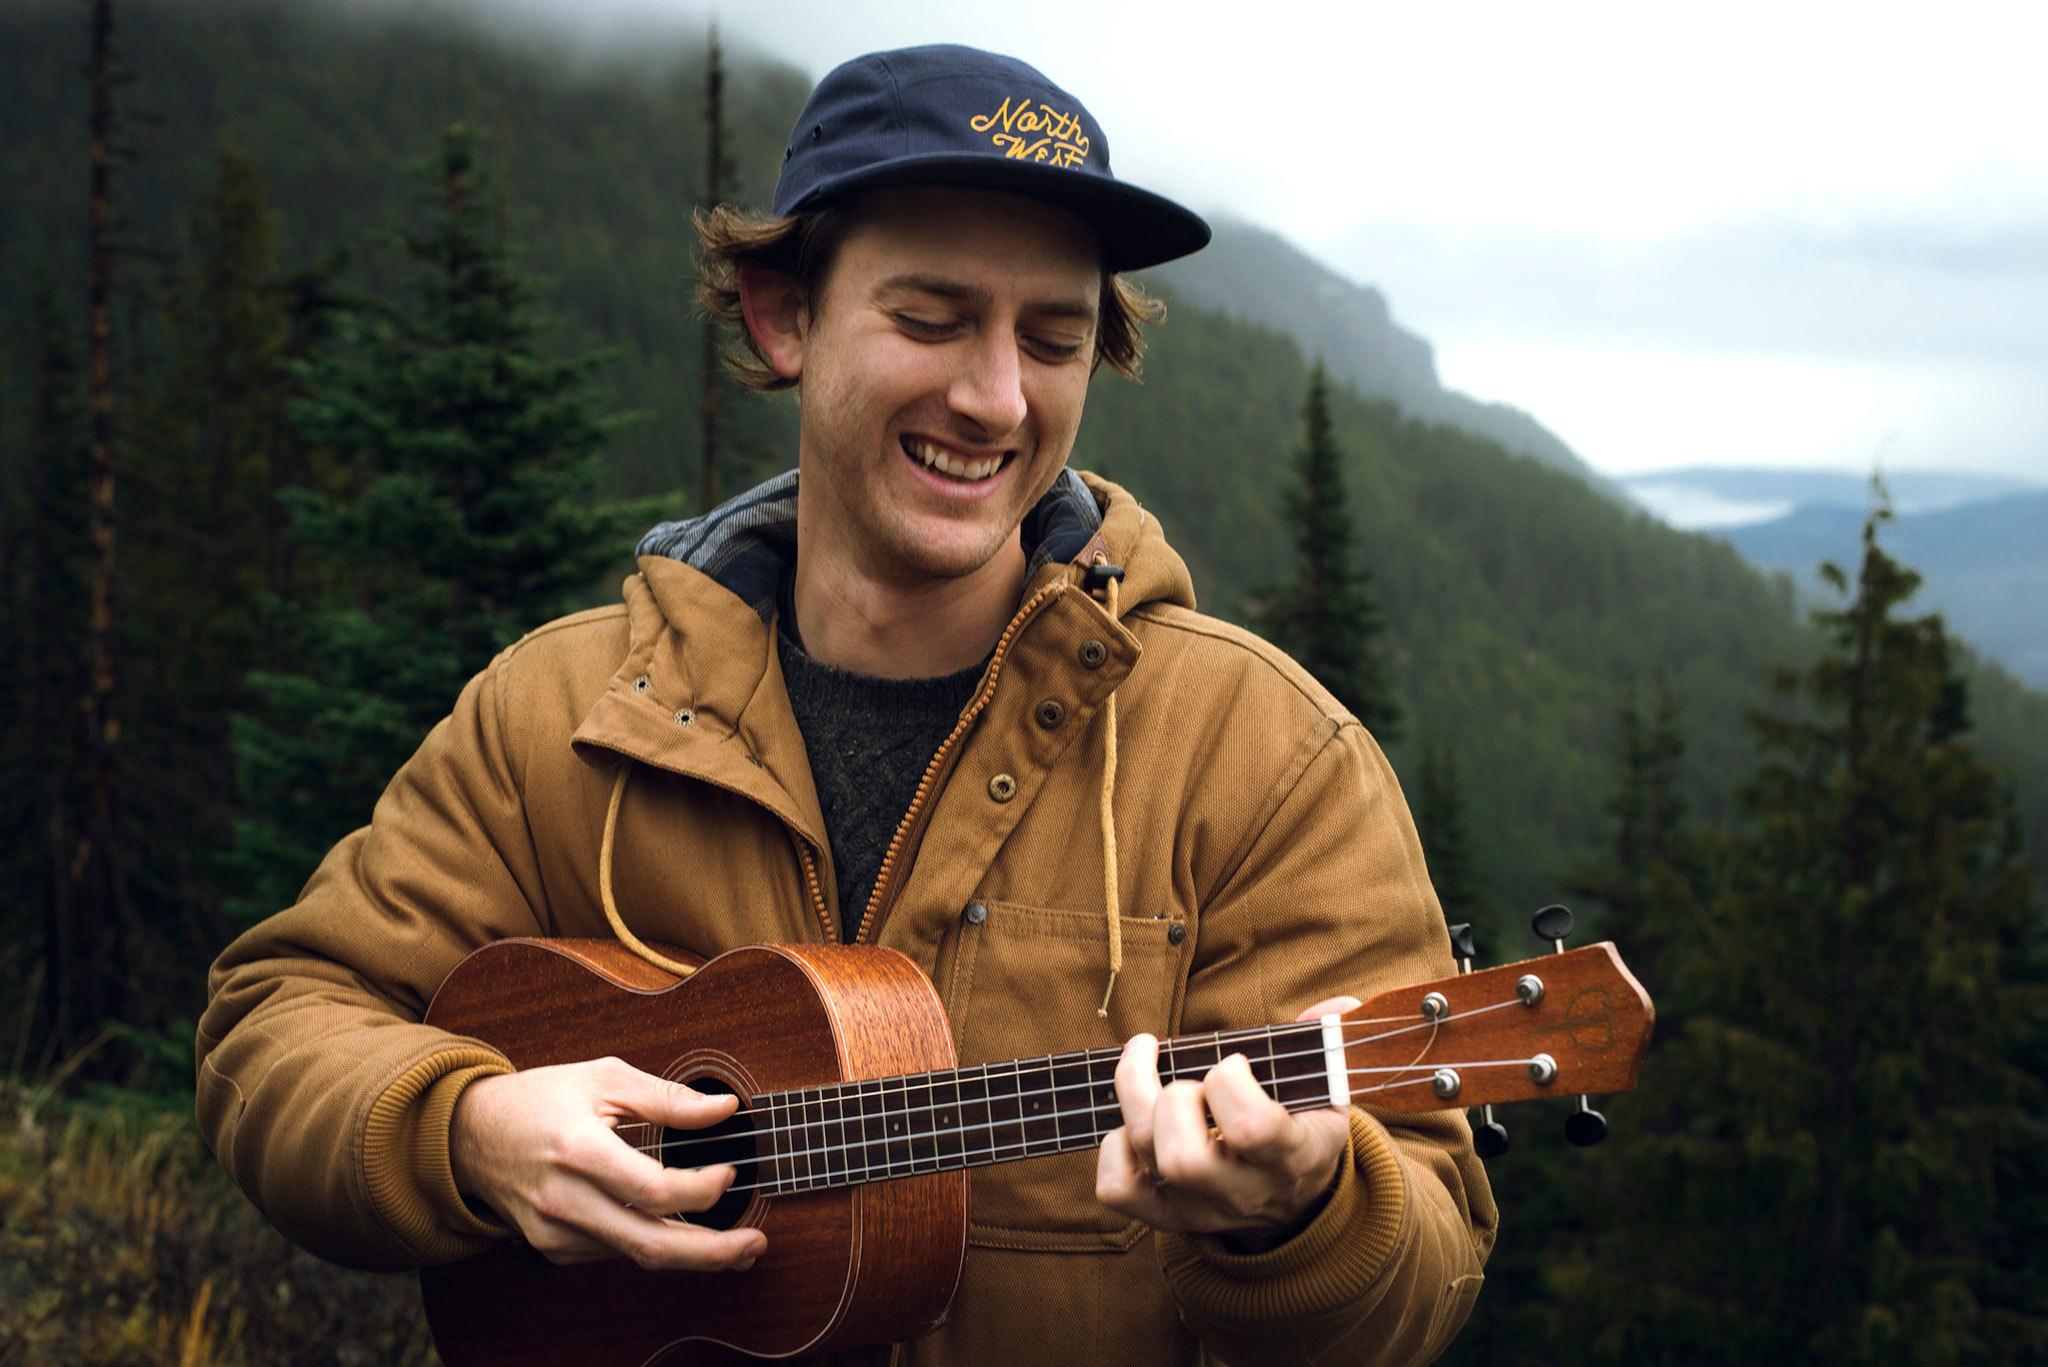 David Isaac Rivers releases his album “Psalms” on Friday, Dec. 9, at Calvary Chapel Sequim. He said it fuses folk music with Irish traditions, drums, guitar, mandolin and powerful vocals. Photos by Abby Latson